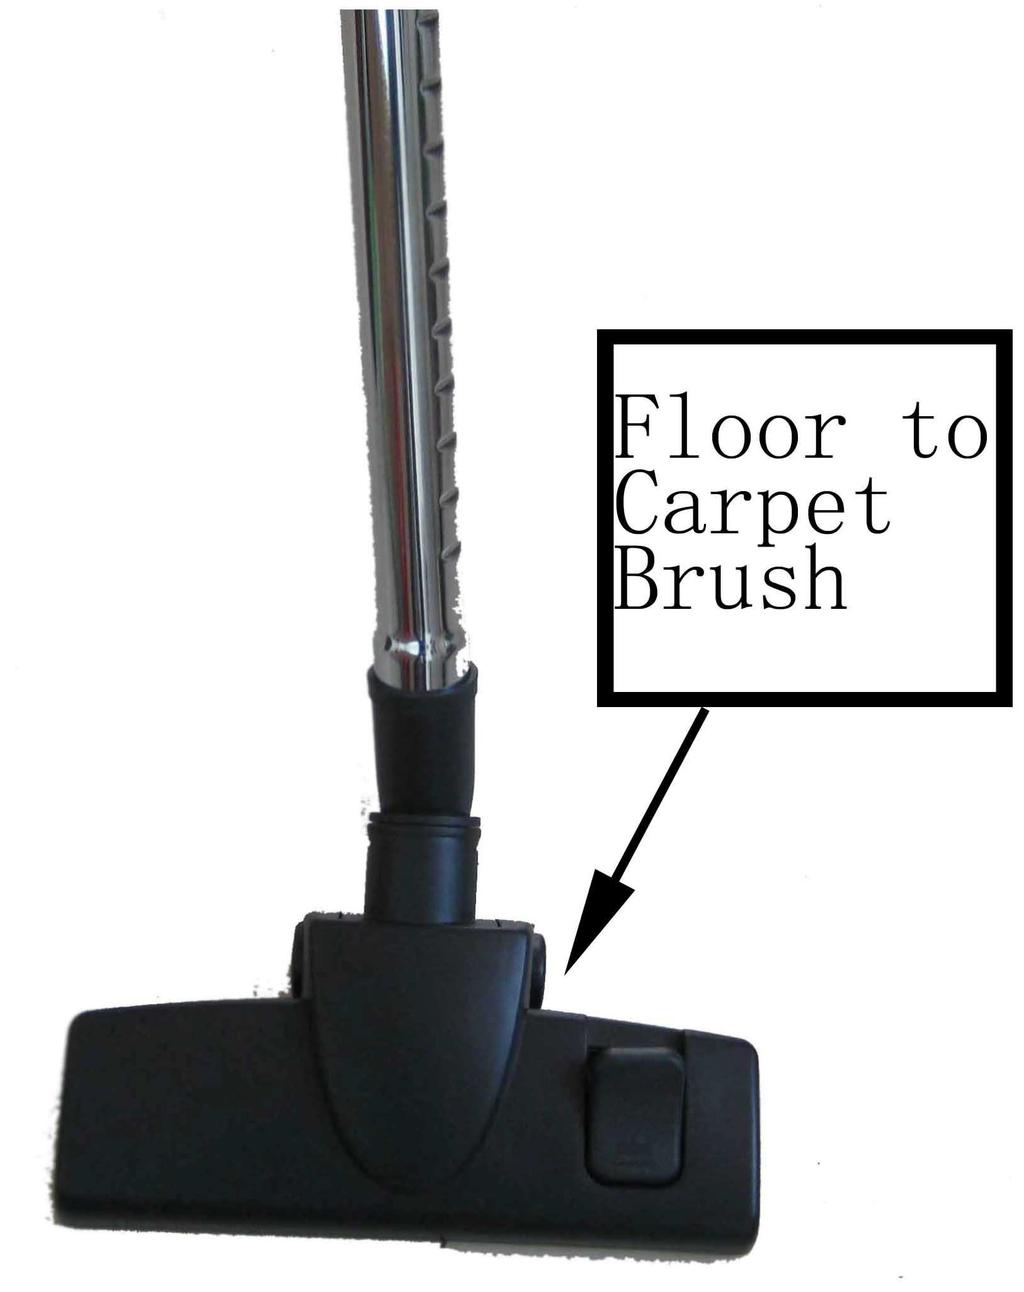 there are two(2) different heights one for floors and one for carpets. Fig.